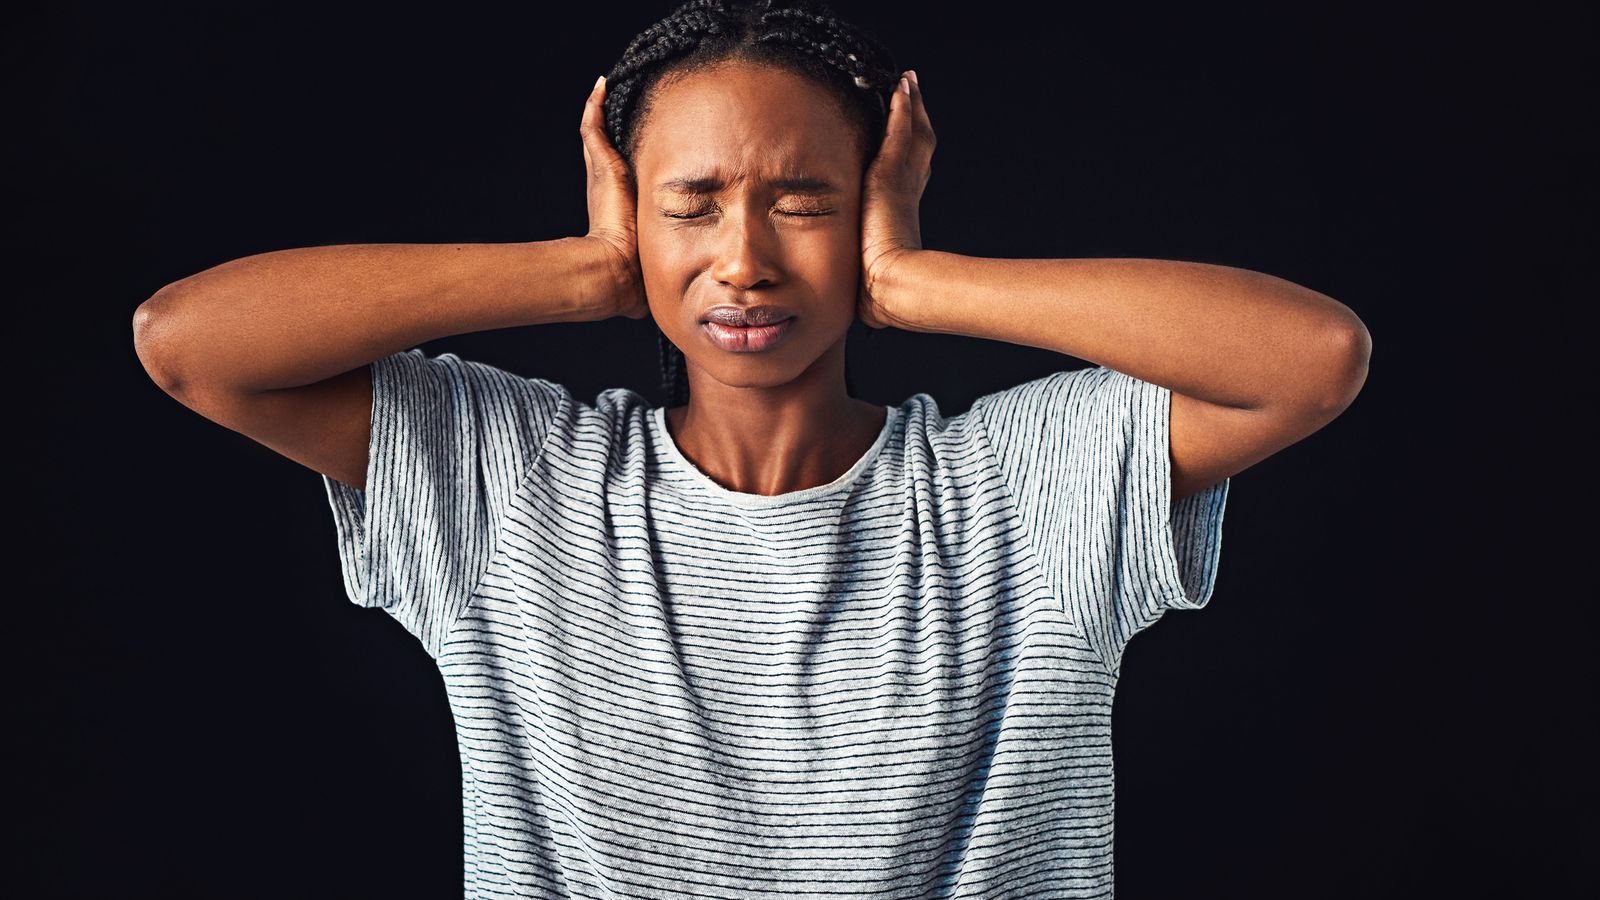 Do some sounds make you angry? You may have misophonia